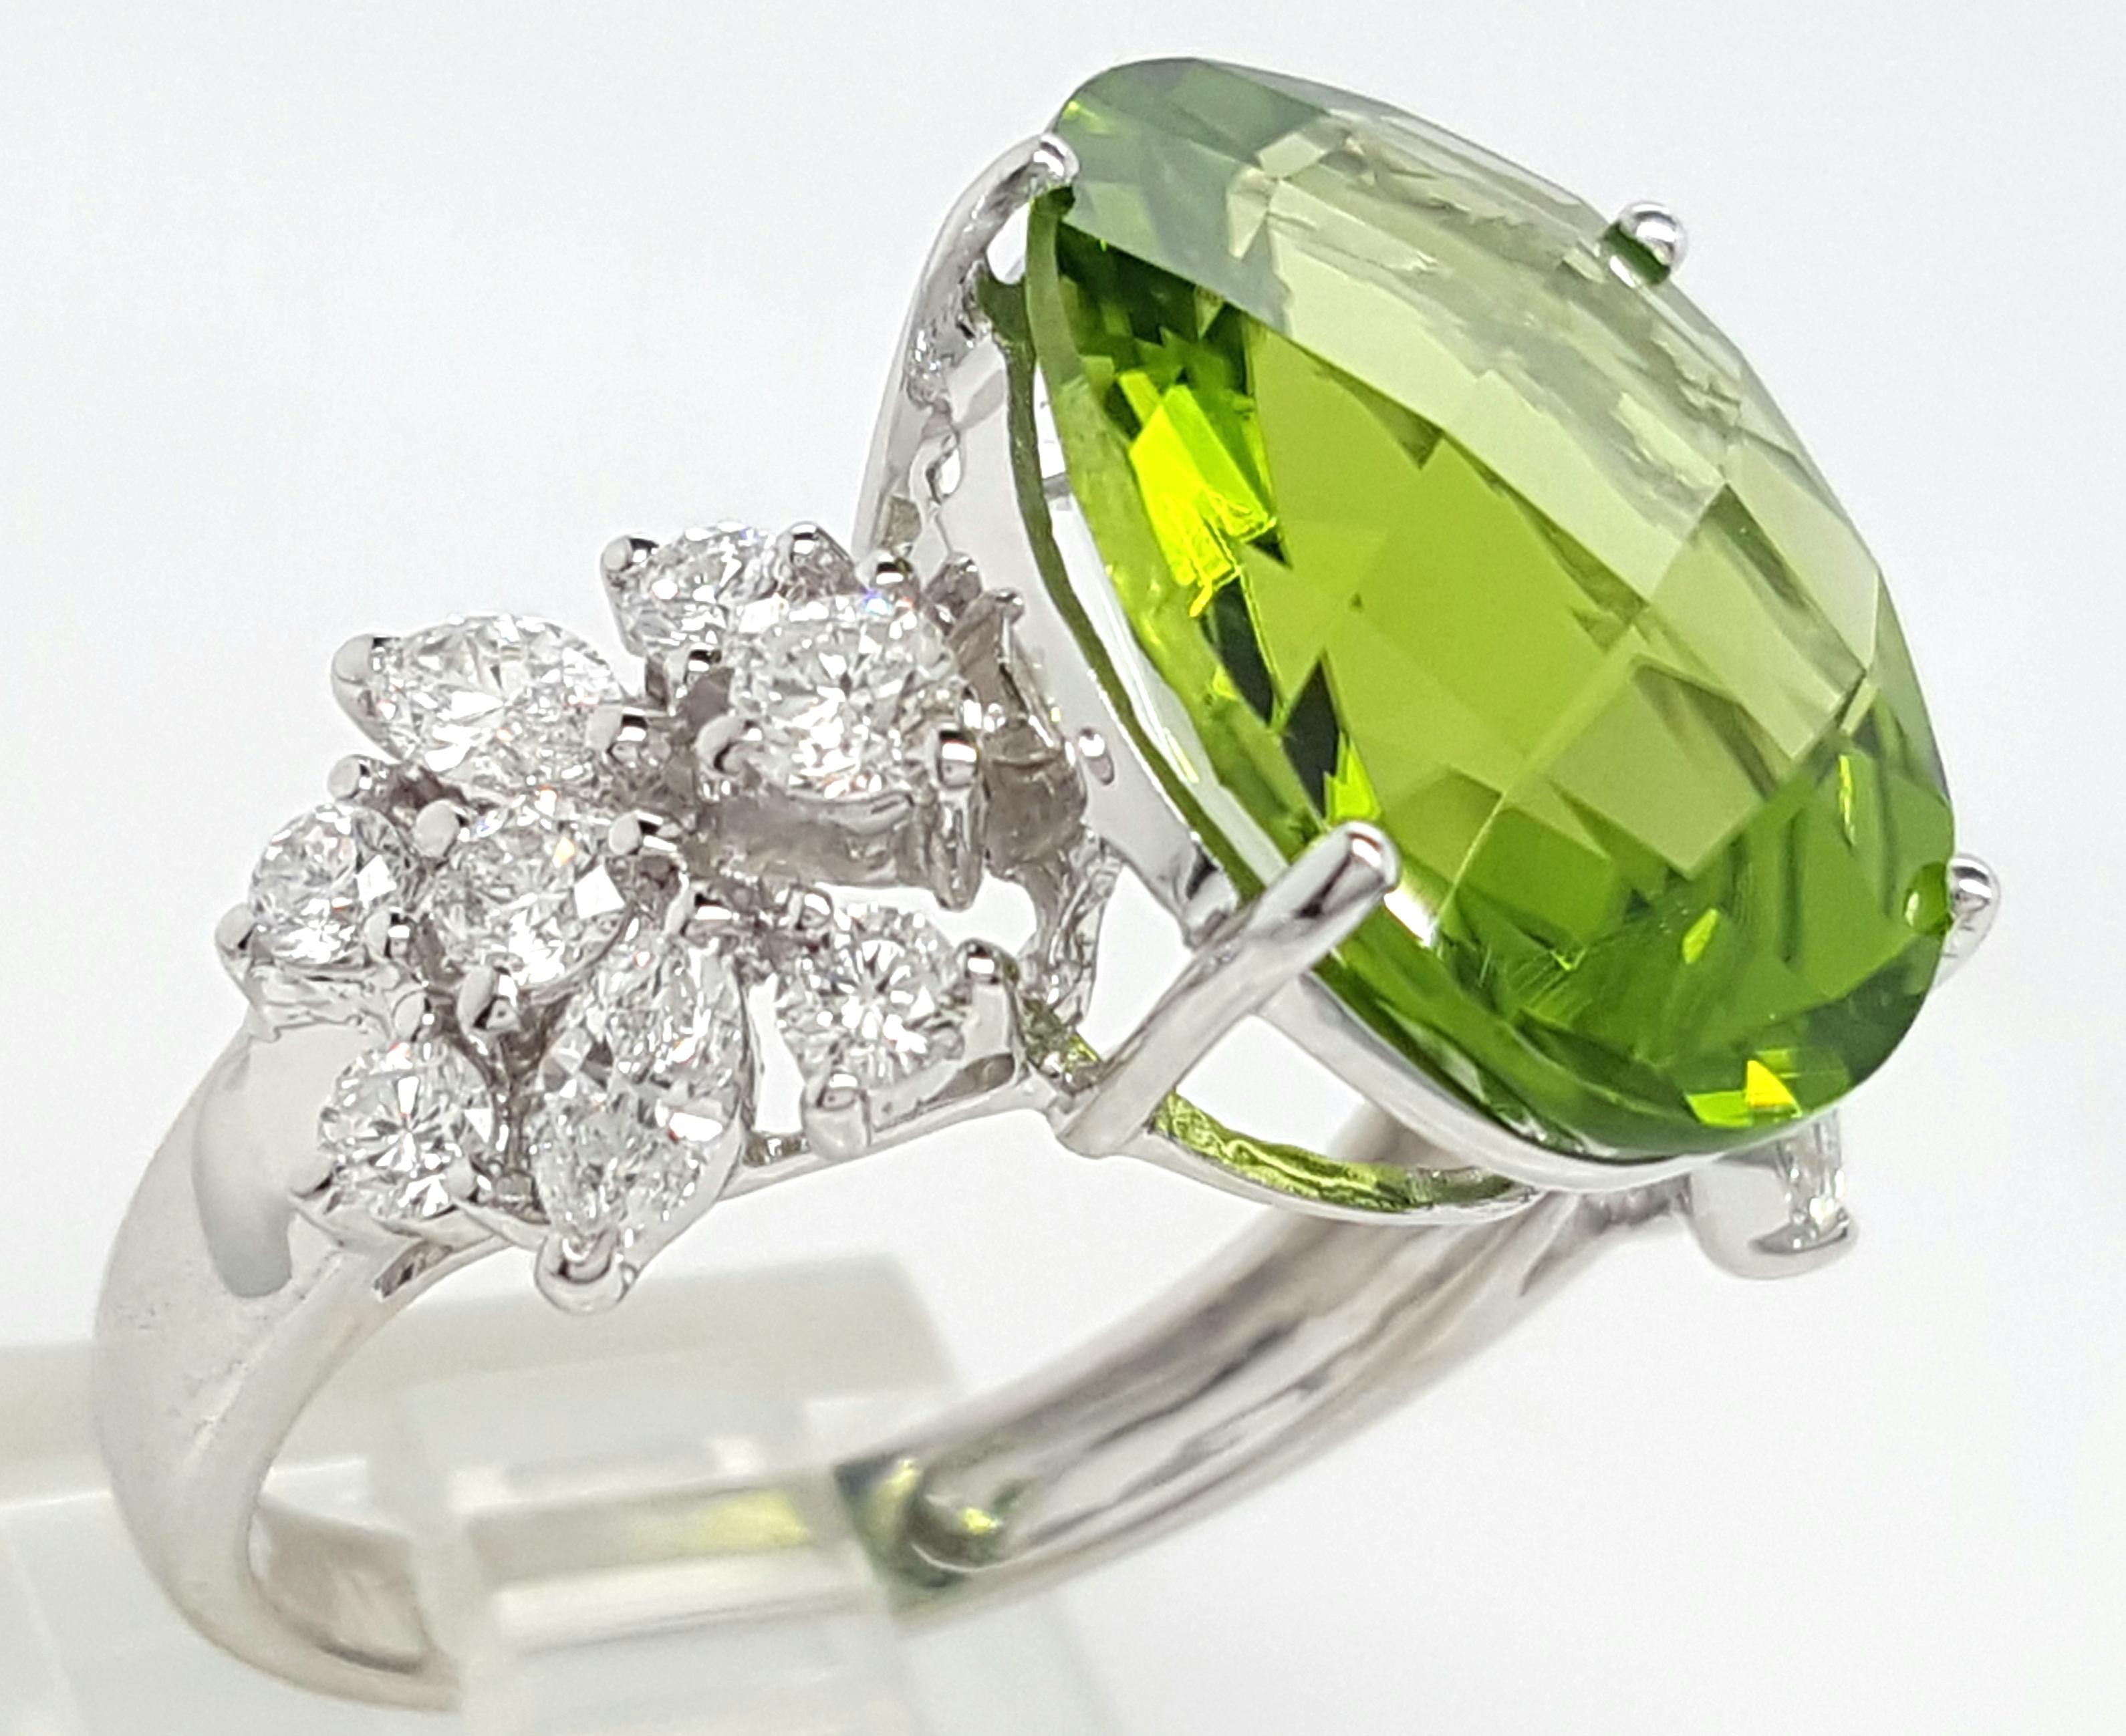 Contemporary 9.13 Carat Natural Peridot and Diamond Cocktail Ring in 18 Karat White Gold